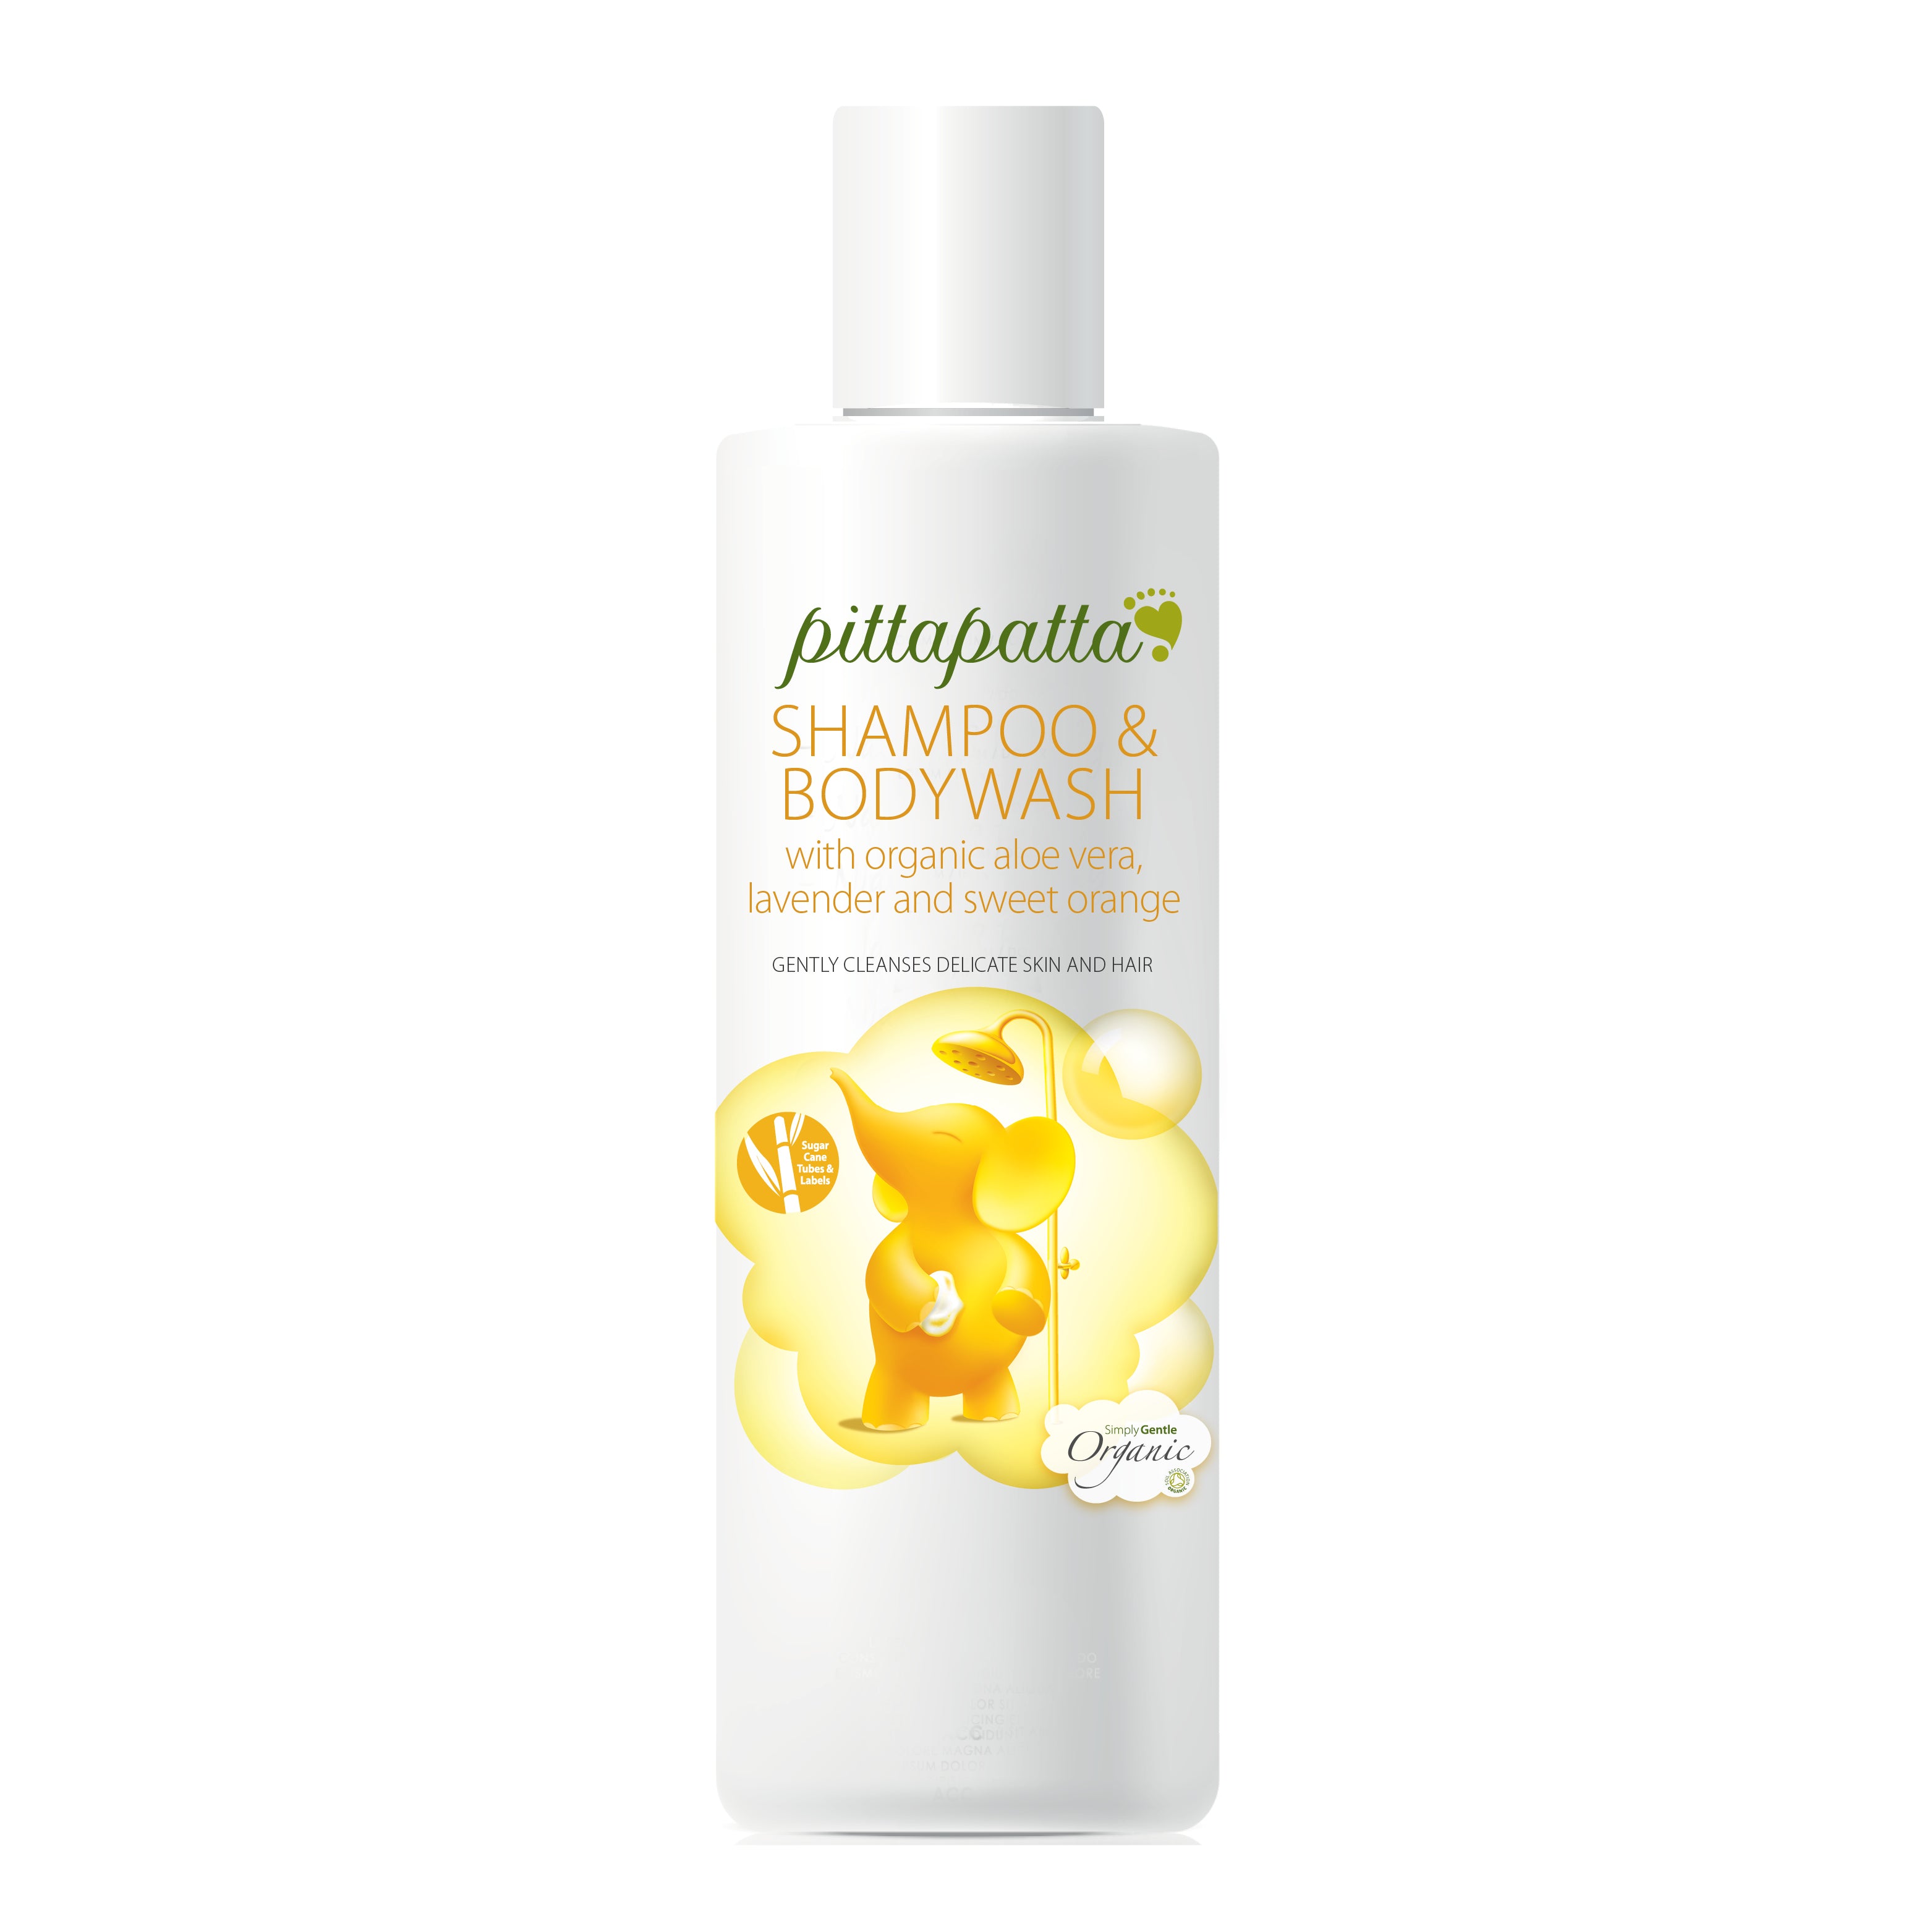 Pittapatta Shampoo & Bodywash with organic aloe vera, lavender & sweet orange. Gently cleanses delicate skin and hair 